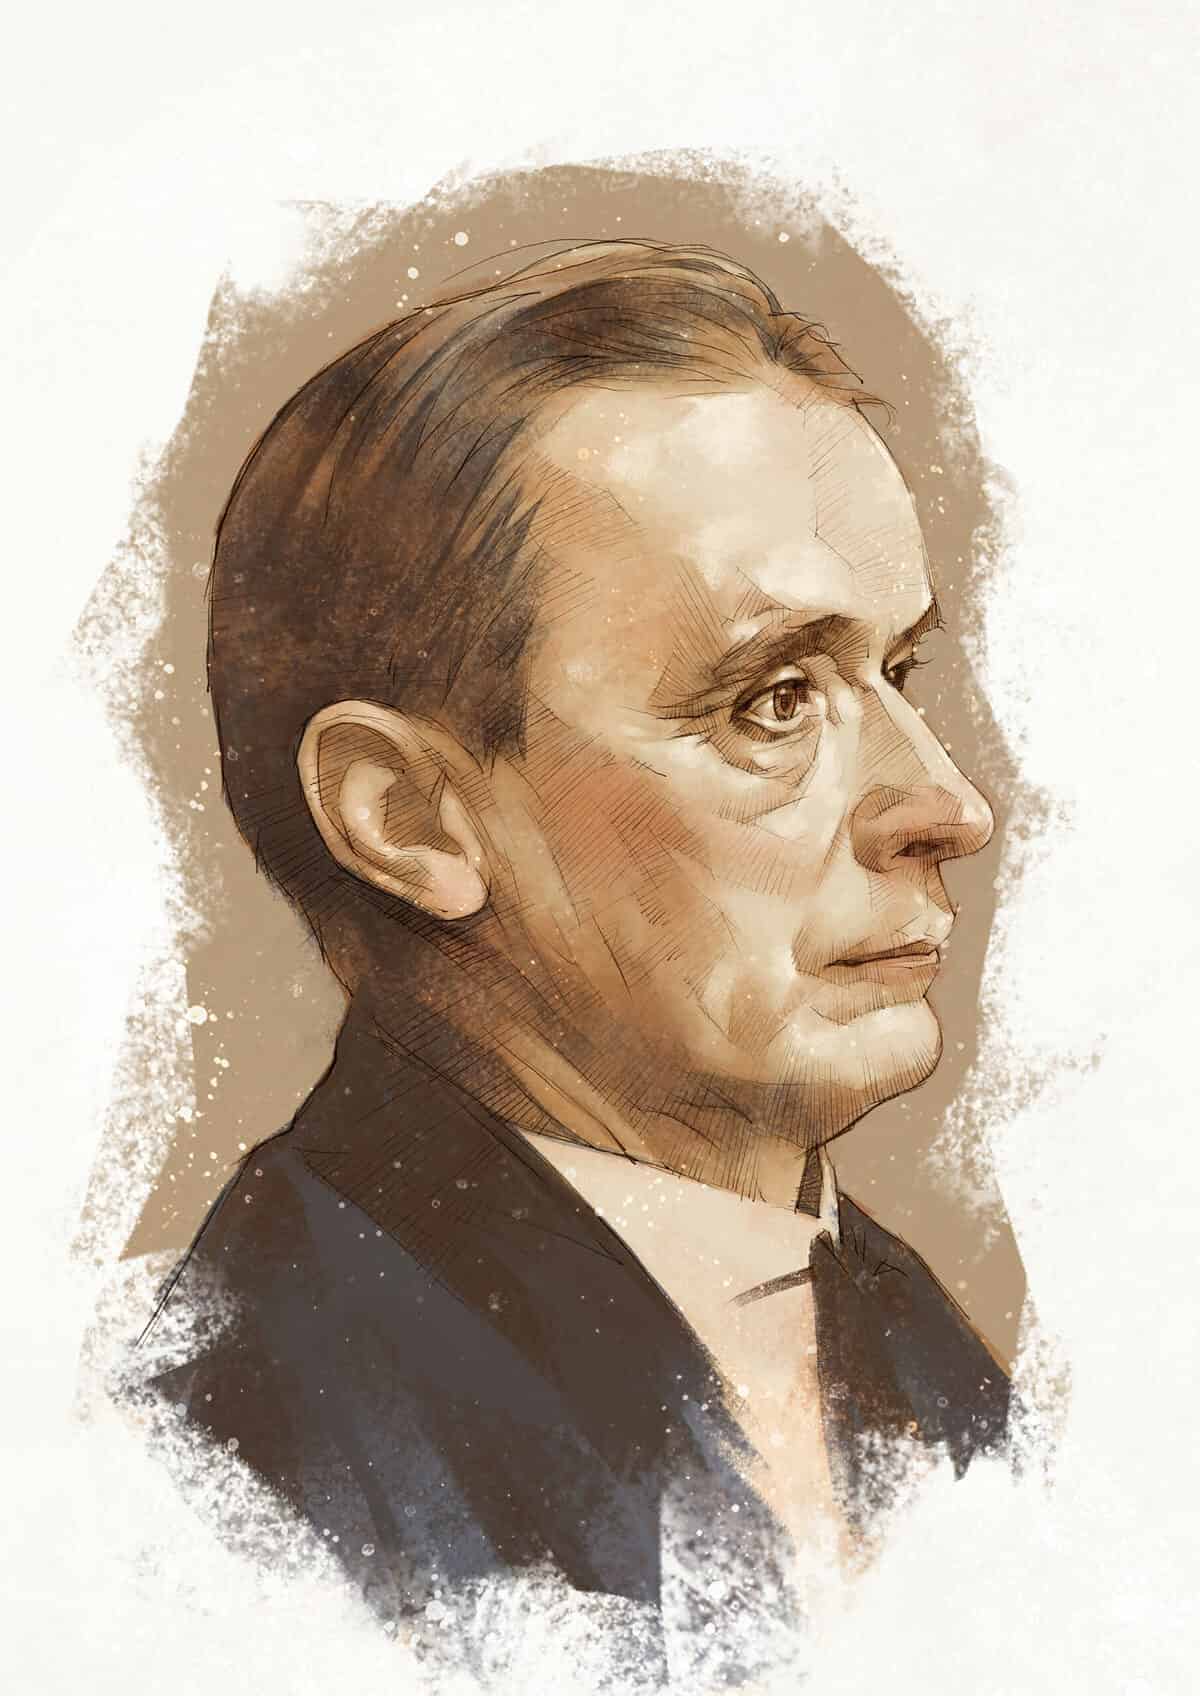 A water-color portrait (bust) of Rudolf Steiner He is facing frame right. his leg ear is visible. He's a basic light-skinned dude with a receding hairline painting has him wearing a jacket